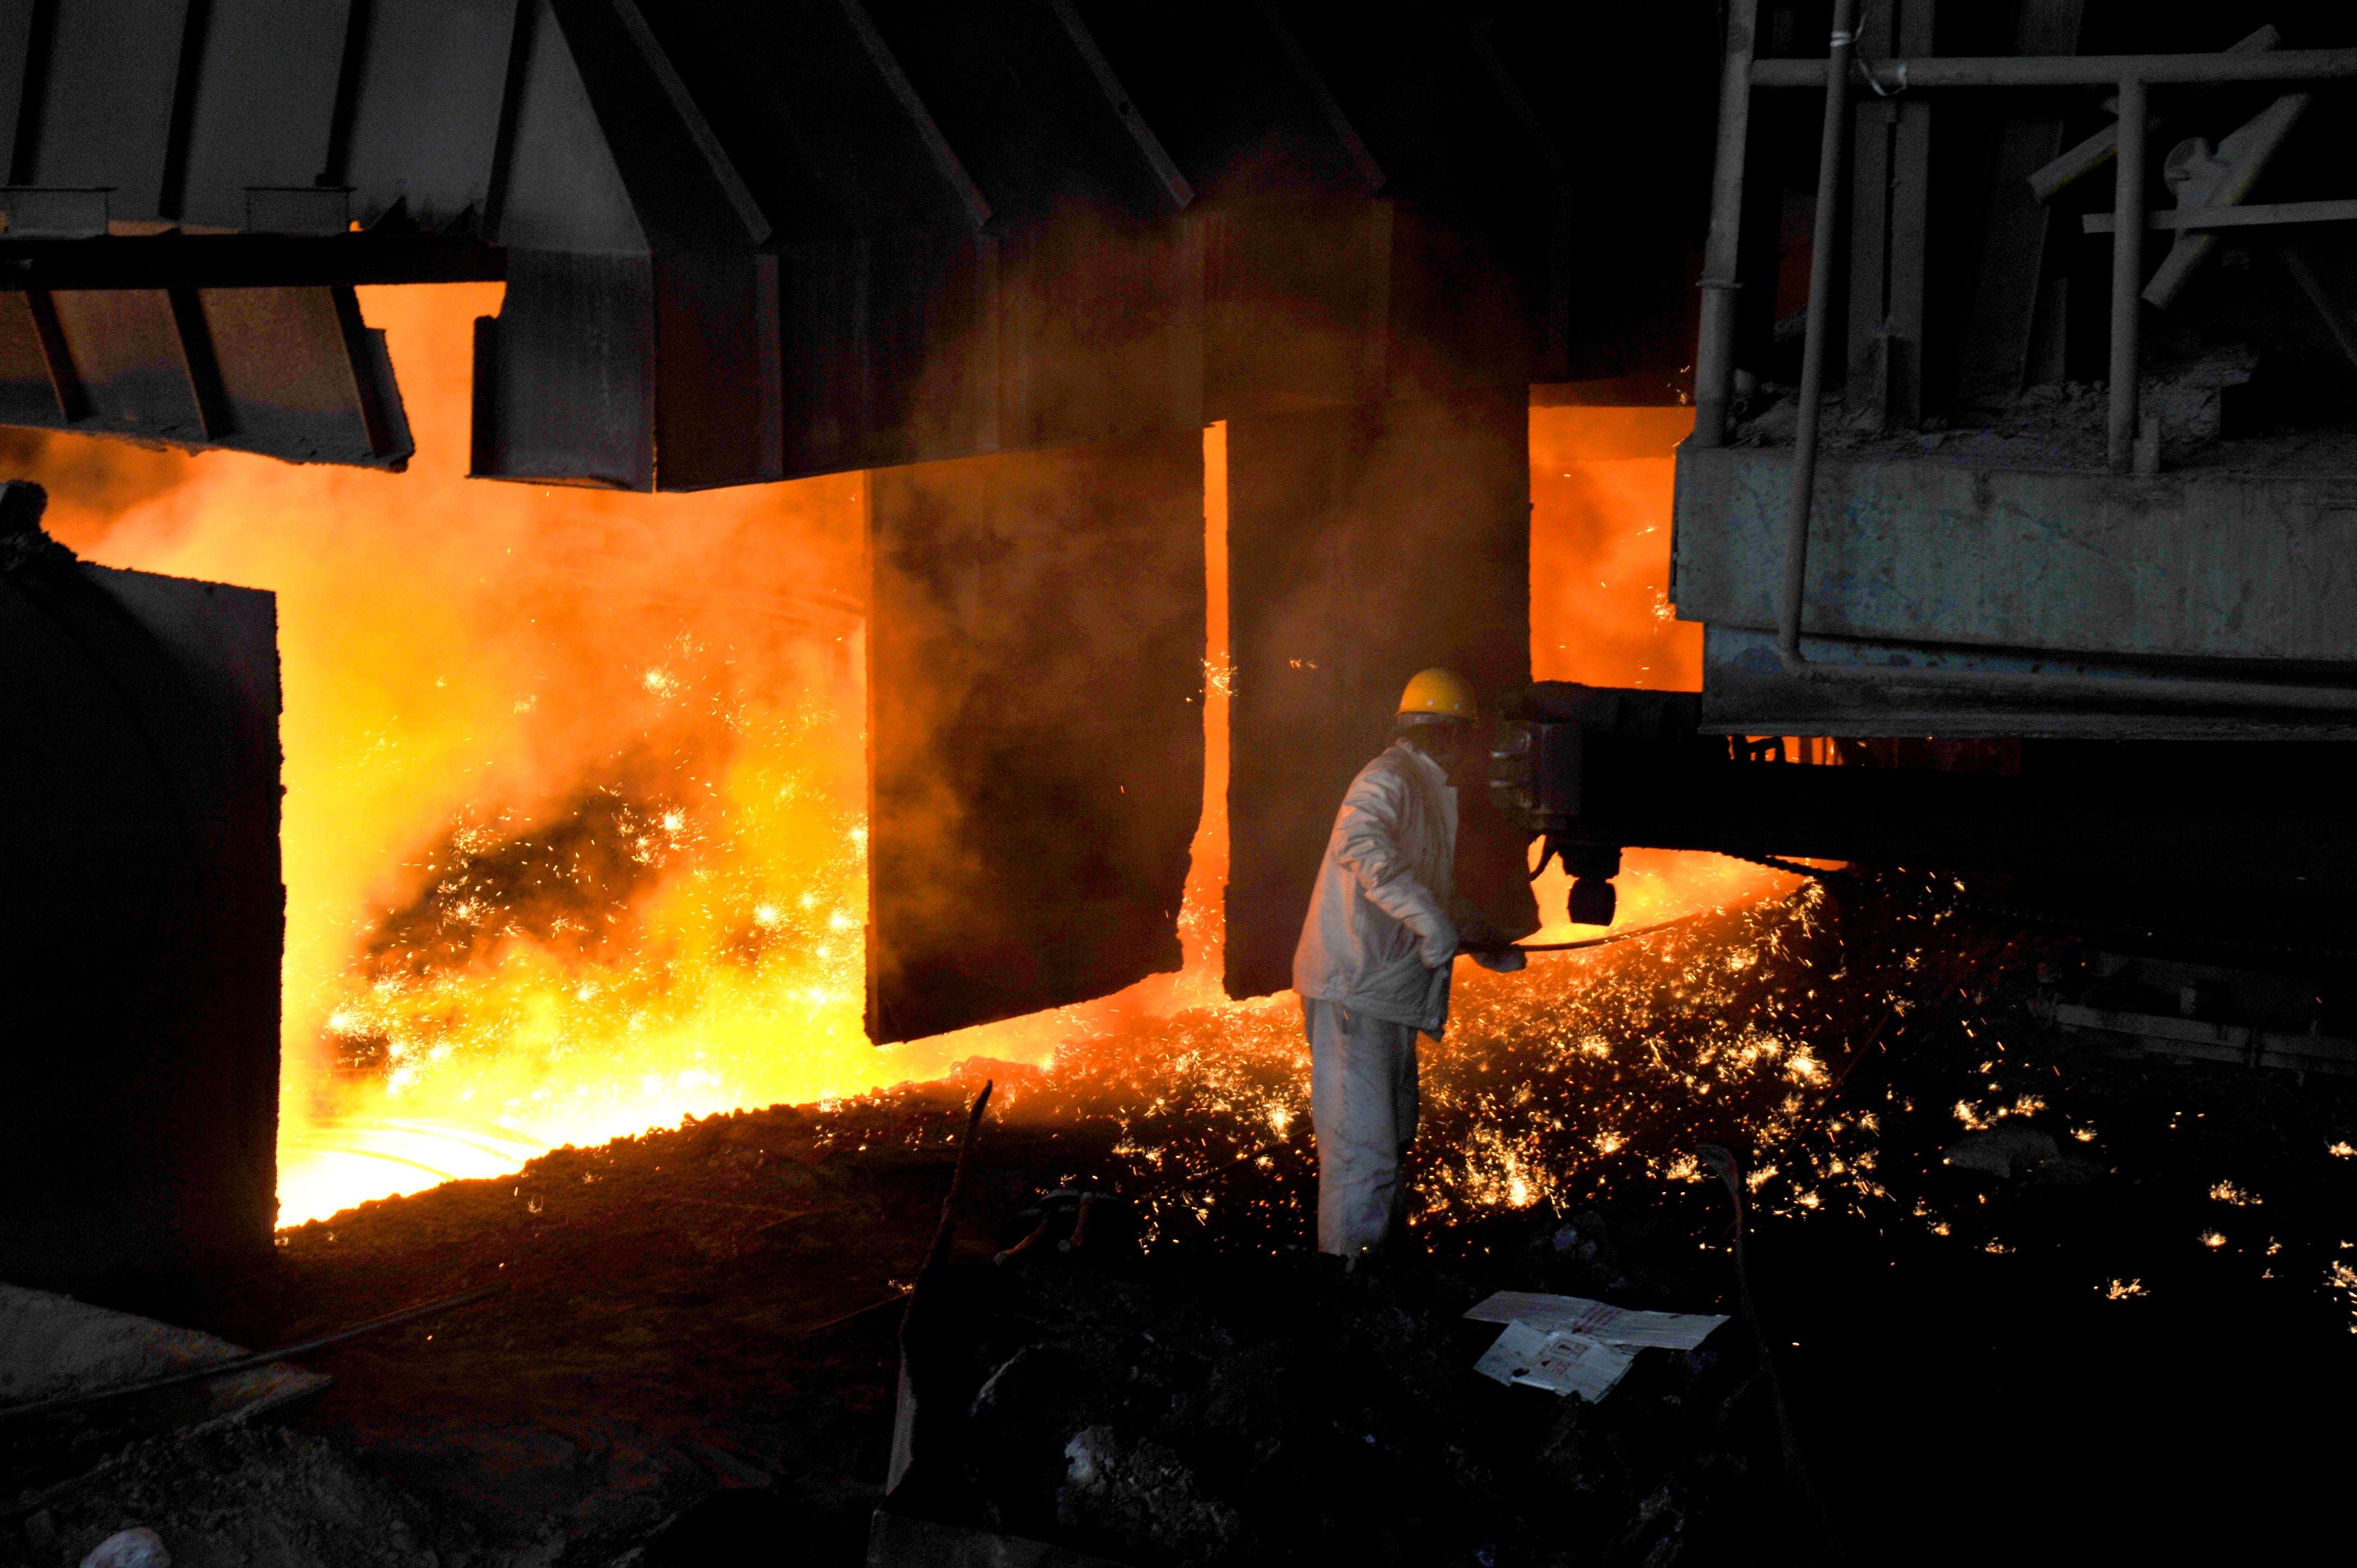 Chinese steelmakers reported huge losses this year, battered by plunging prices and massive market overcapacity amid the country’s economic slowdown. Photo: Xinhua